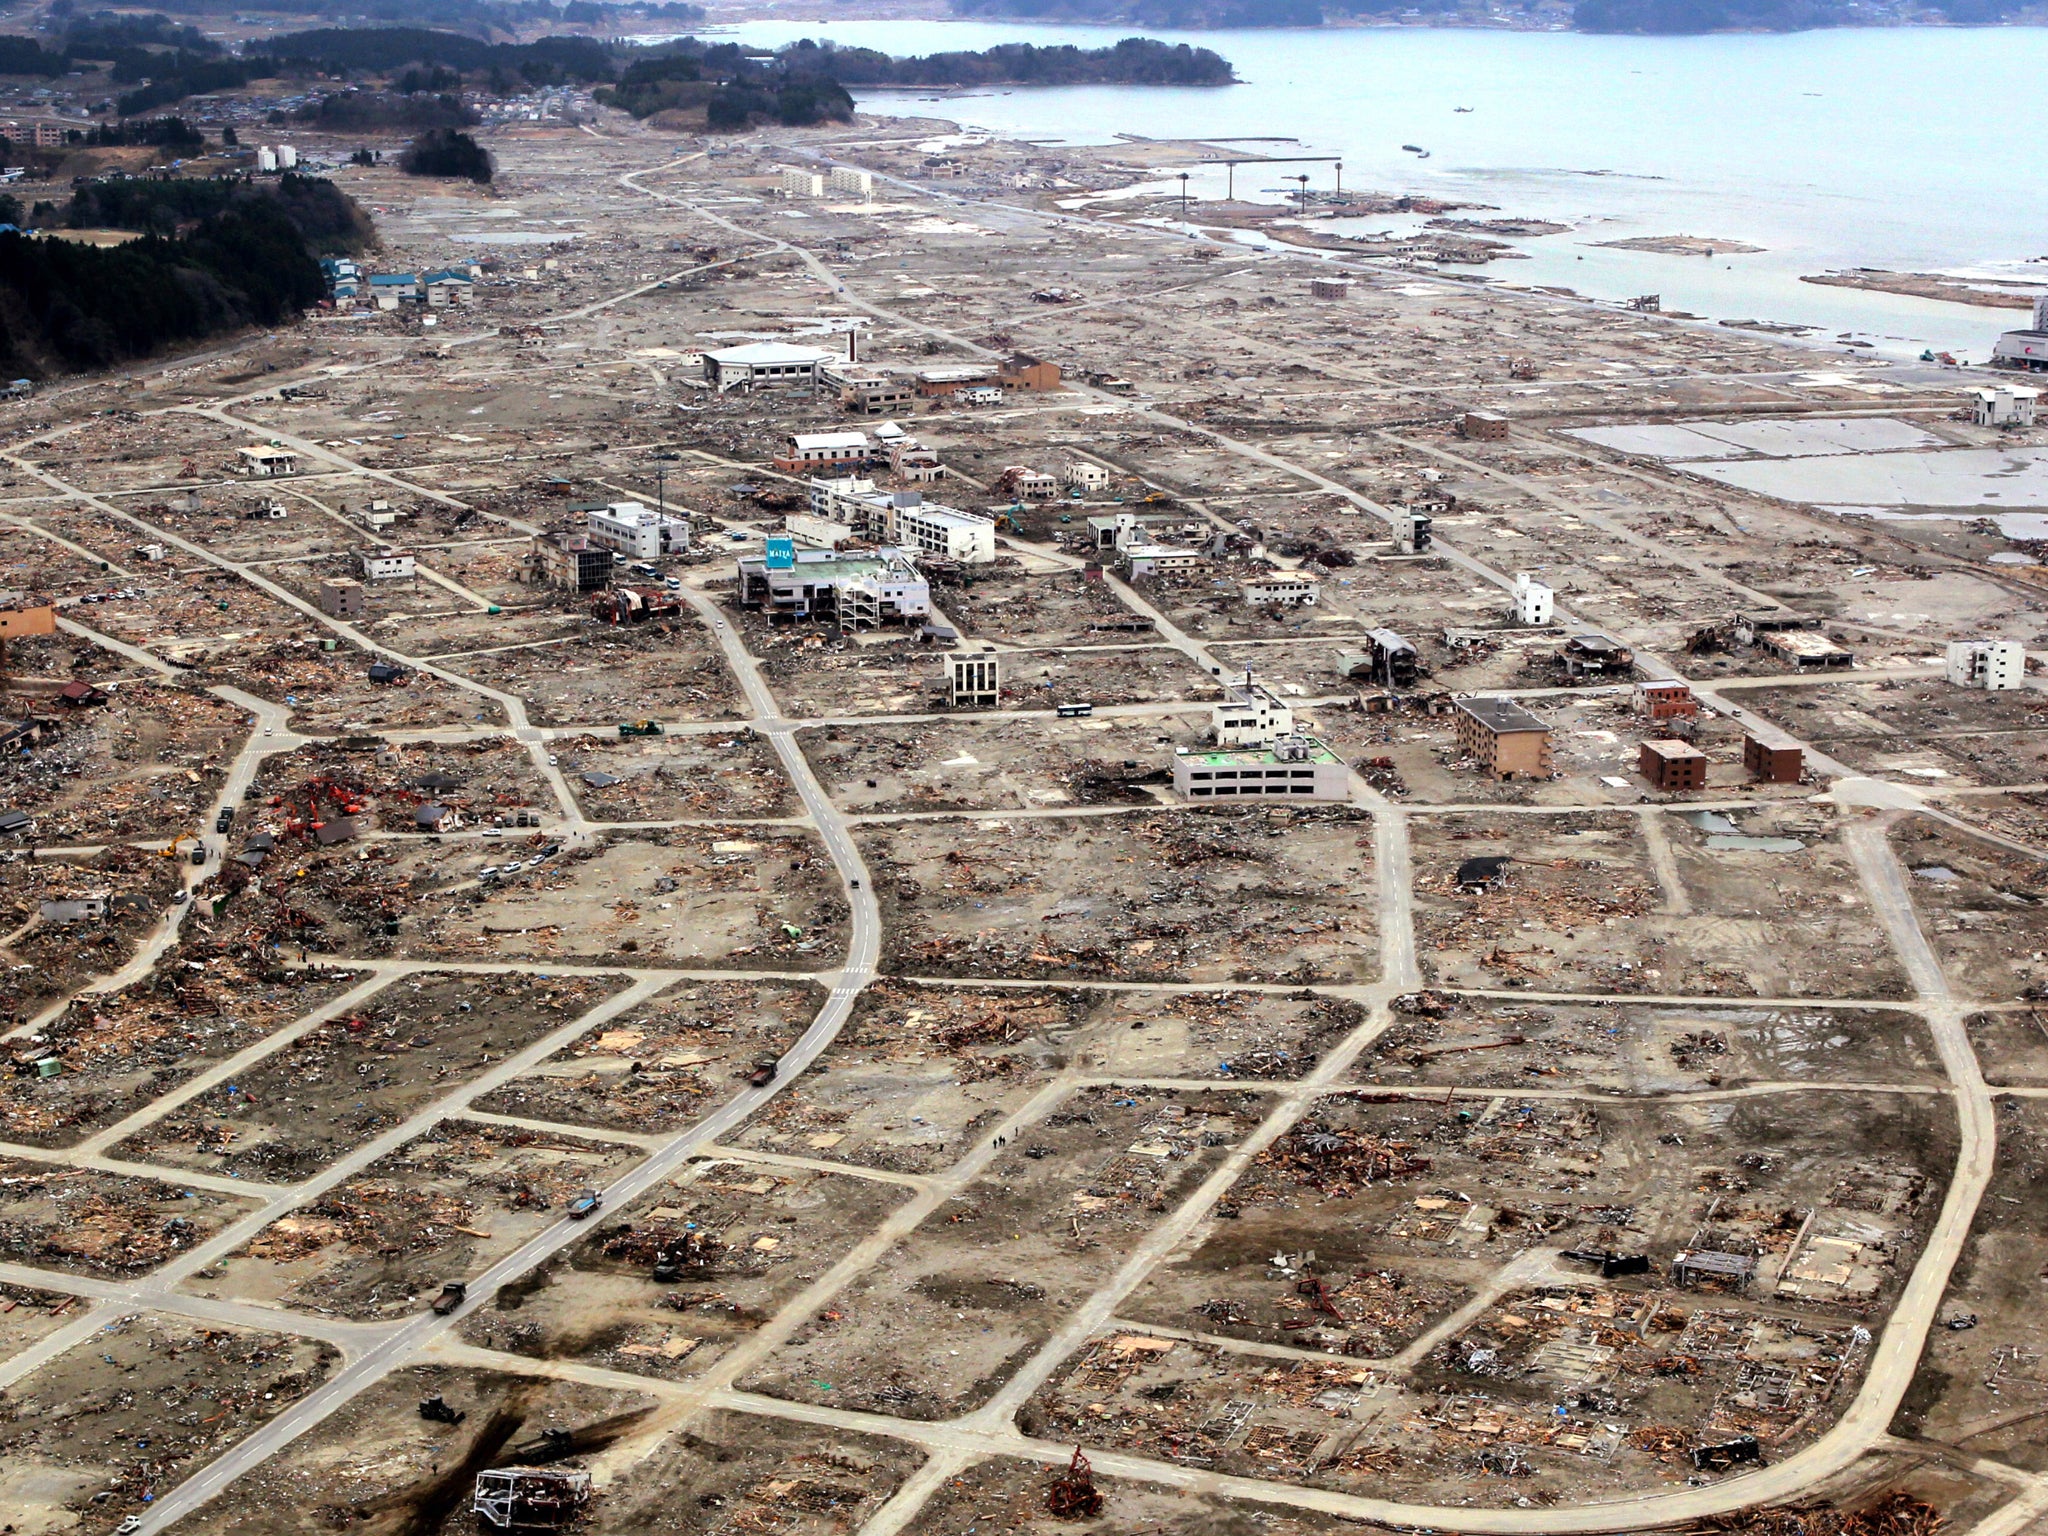 An aerial view of Rikuzentakata City a month after the earthquake